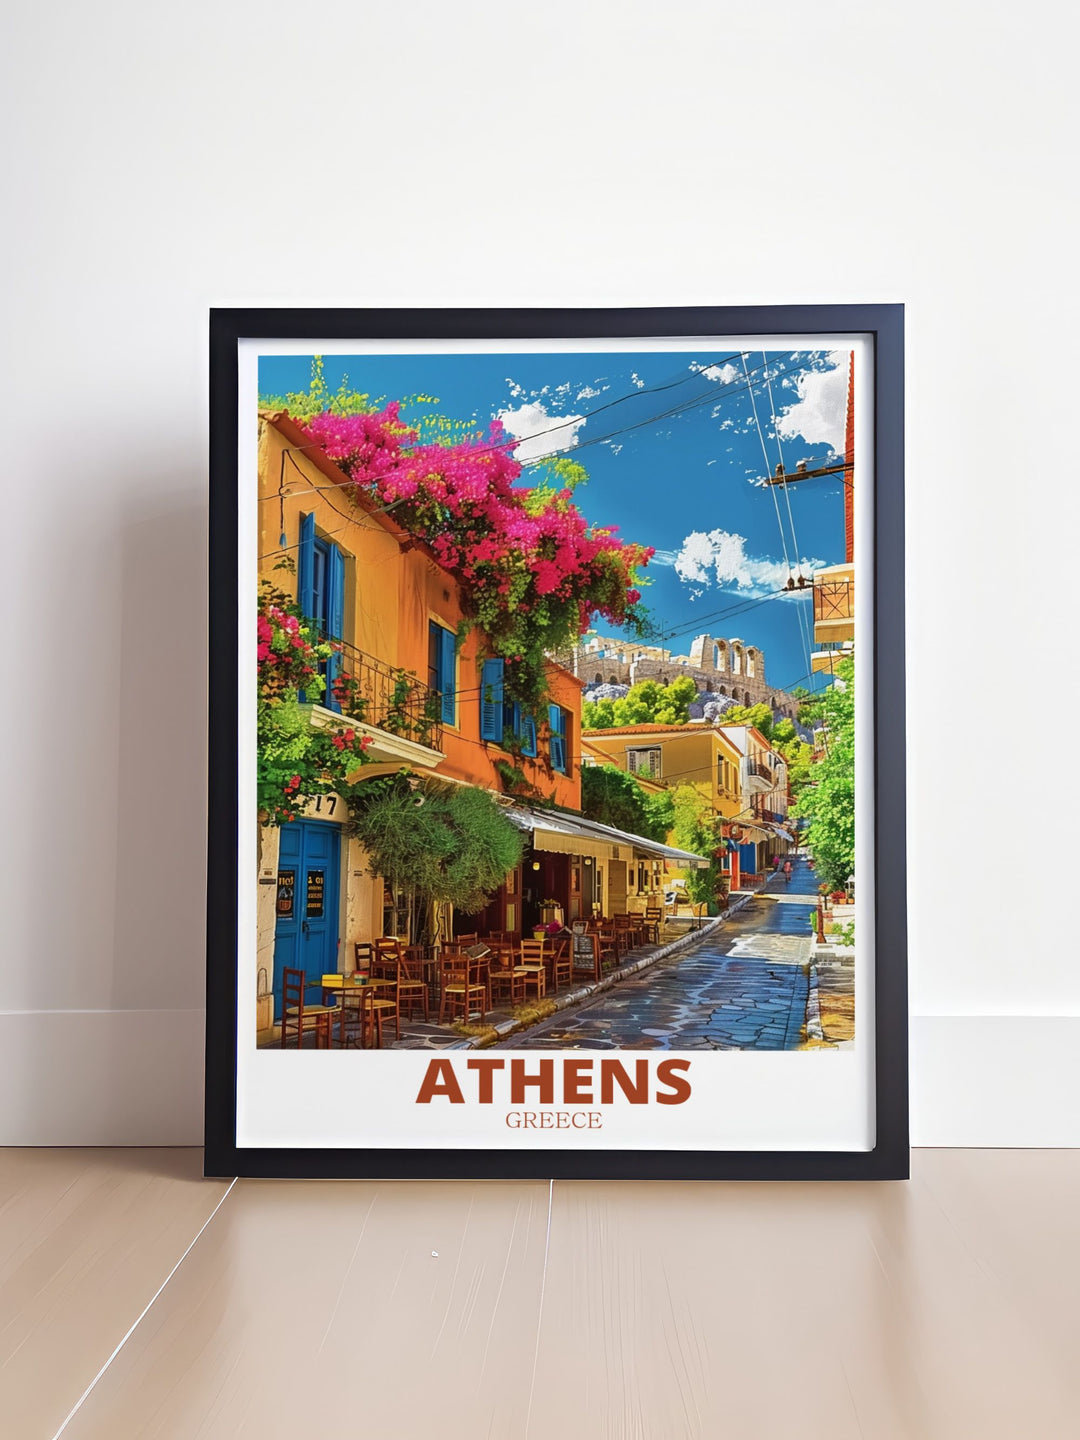 PlakaNeighborhood Prints showcasing the charm and character of Athens perfect for home decor and gifts capturing the vibrant spirit and history of Greece in stunning detail